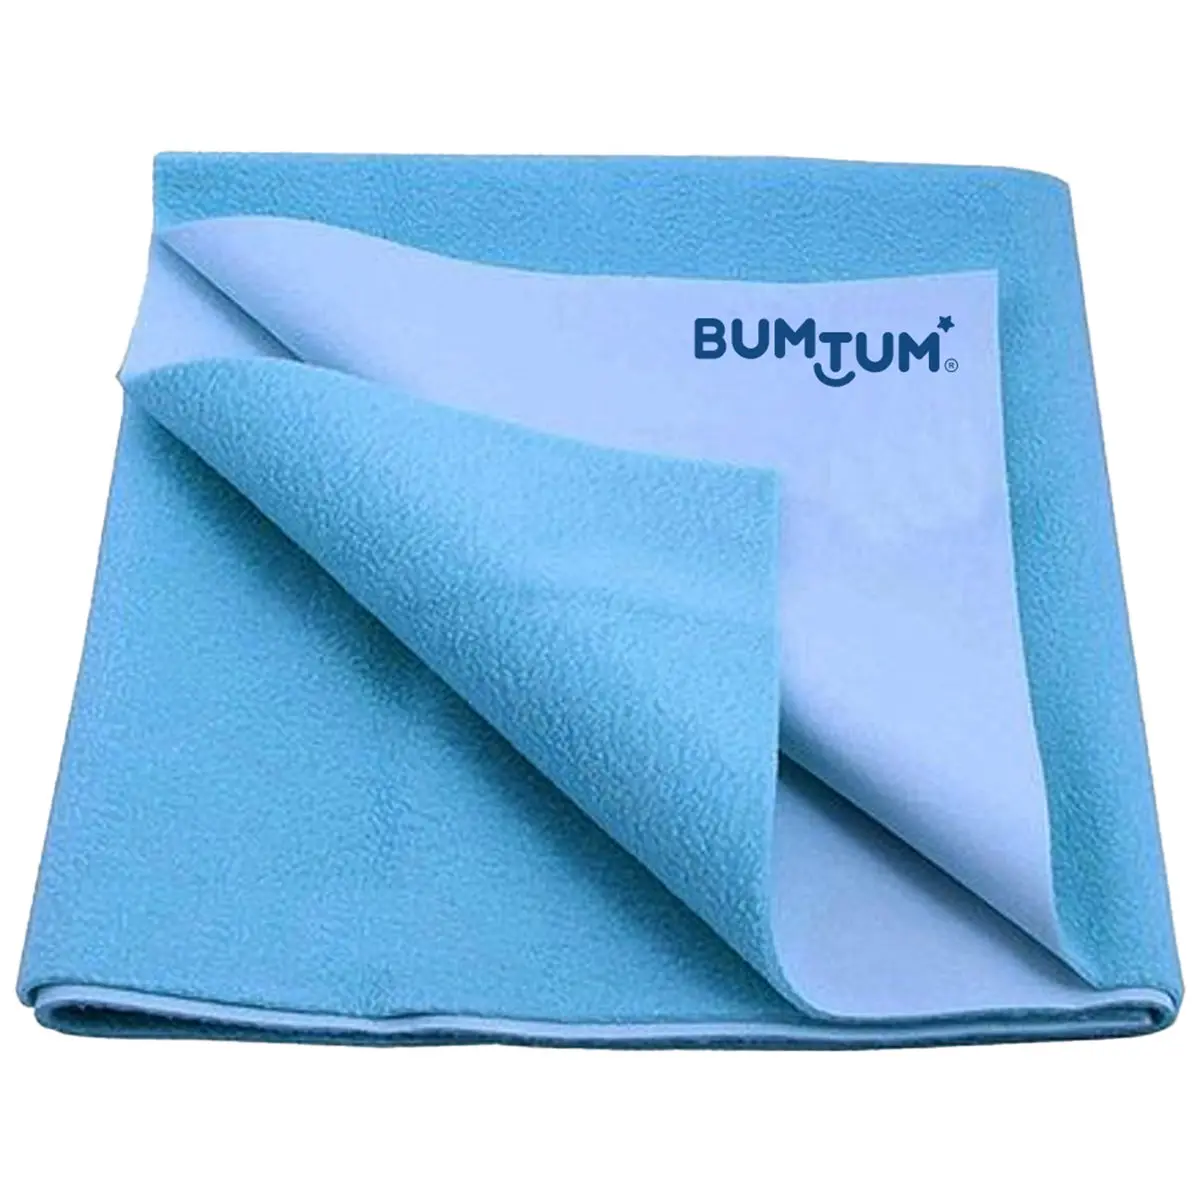 Bumtum Dry Sheet Instadry Leakproof Baby Bed Protector ( Large Size 100*140cm | Pack of 1 )